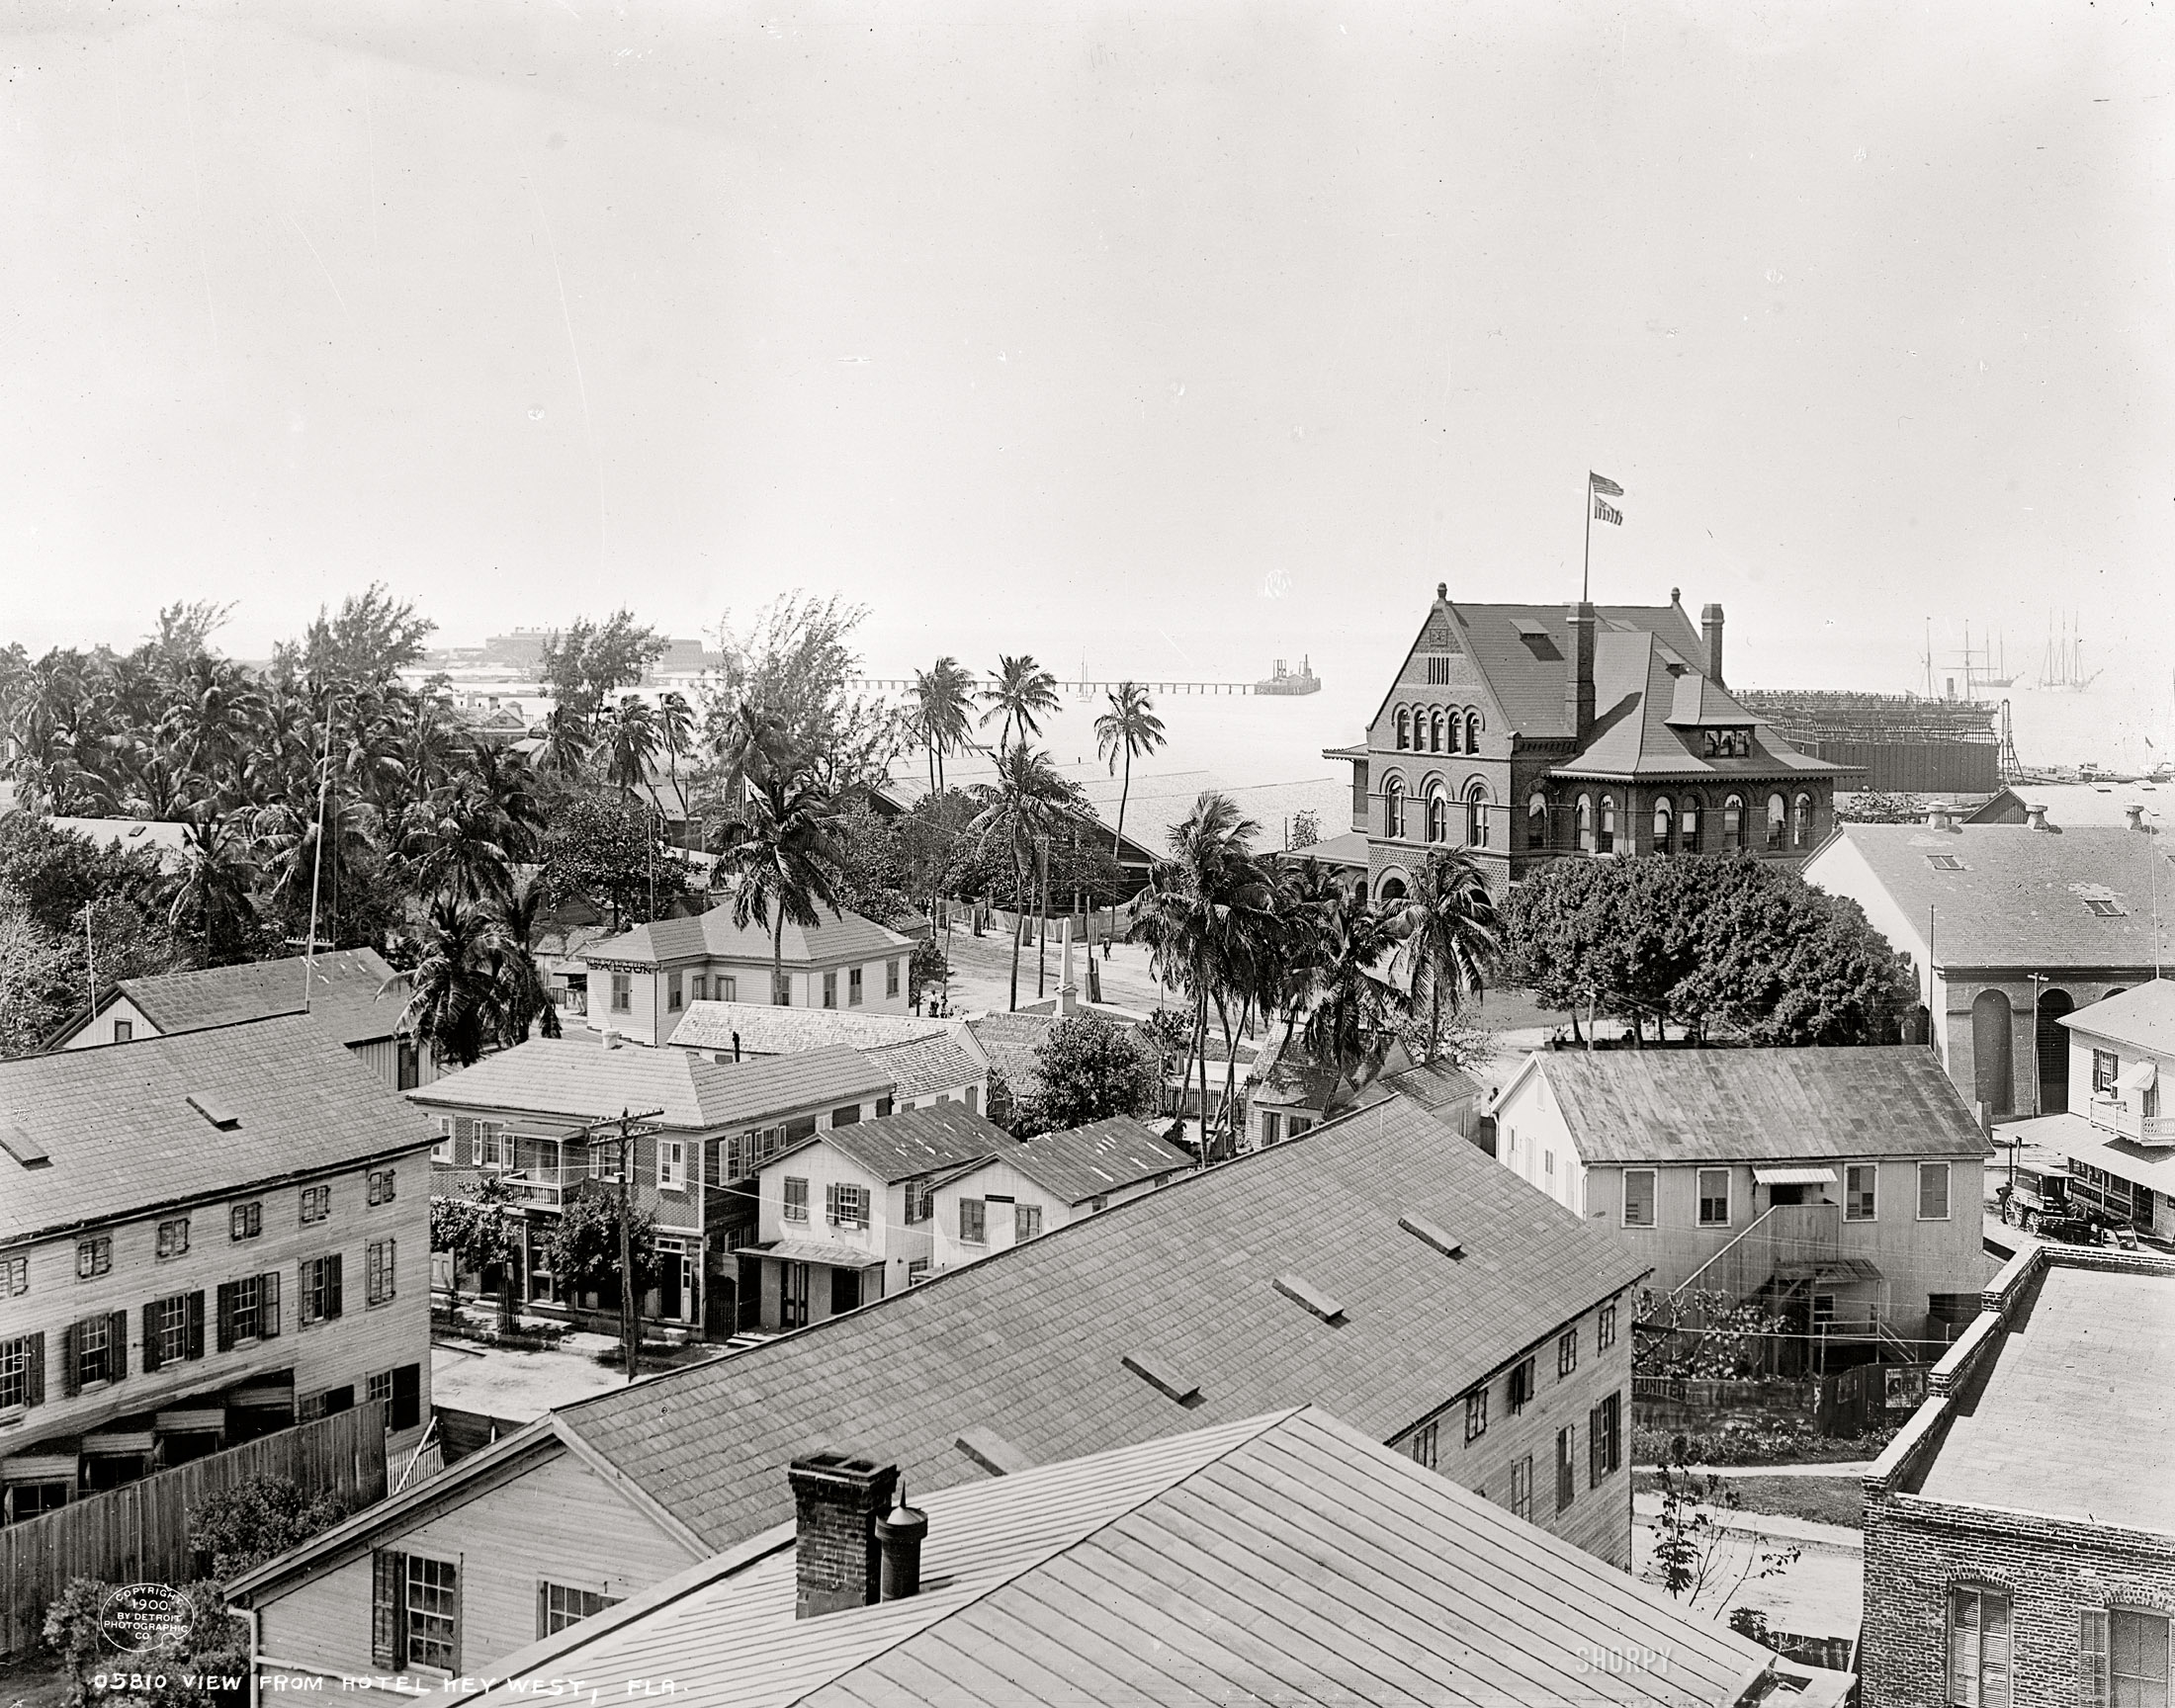 Circa 1900. "Key West, Florida. View from hotel." With nary a T-shirt or flip-flop in sight. Detroit Publishing Company dry-plate glass negative. View full size.